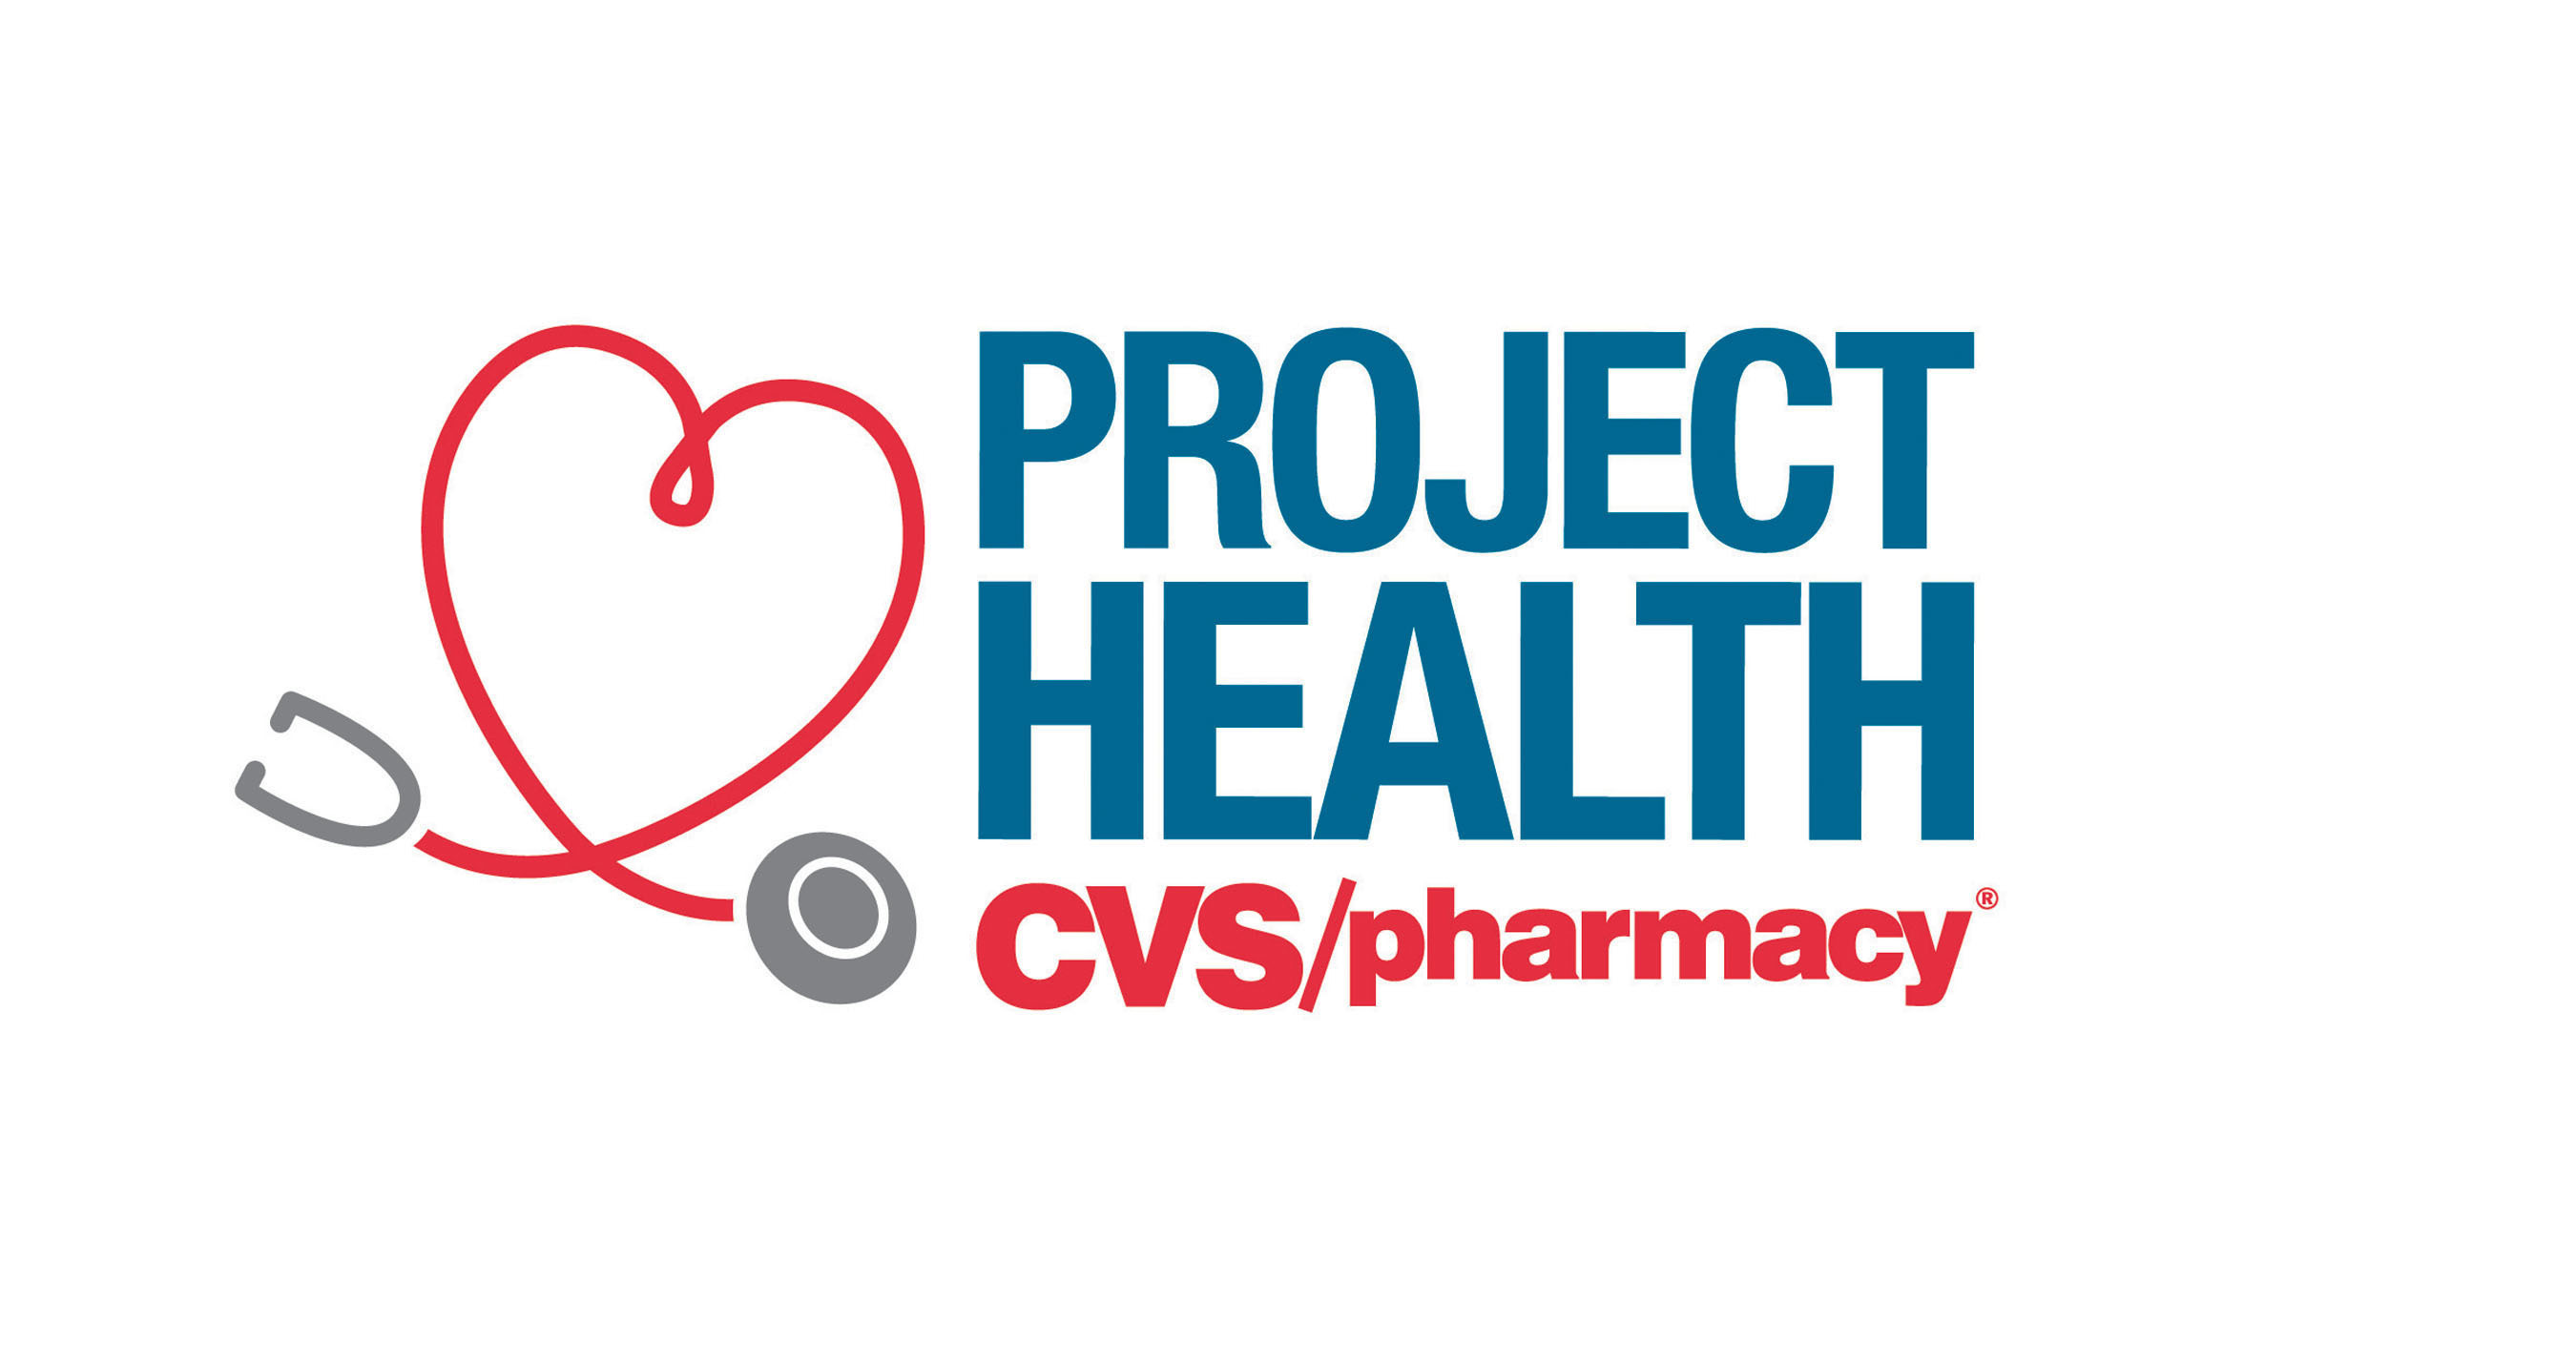 Project health cvs logo caresource youve been logged out